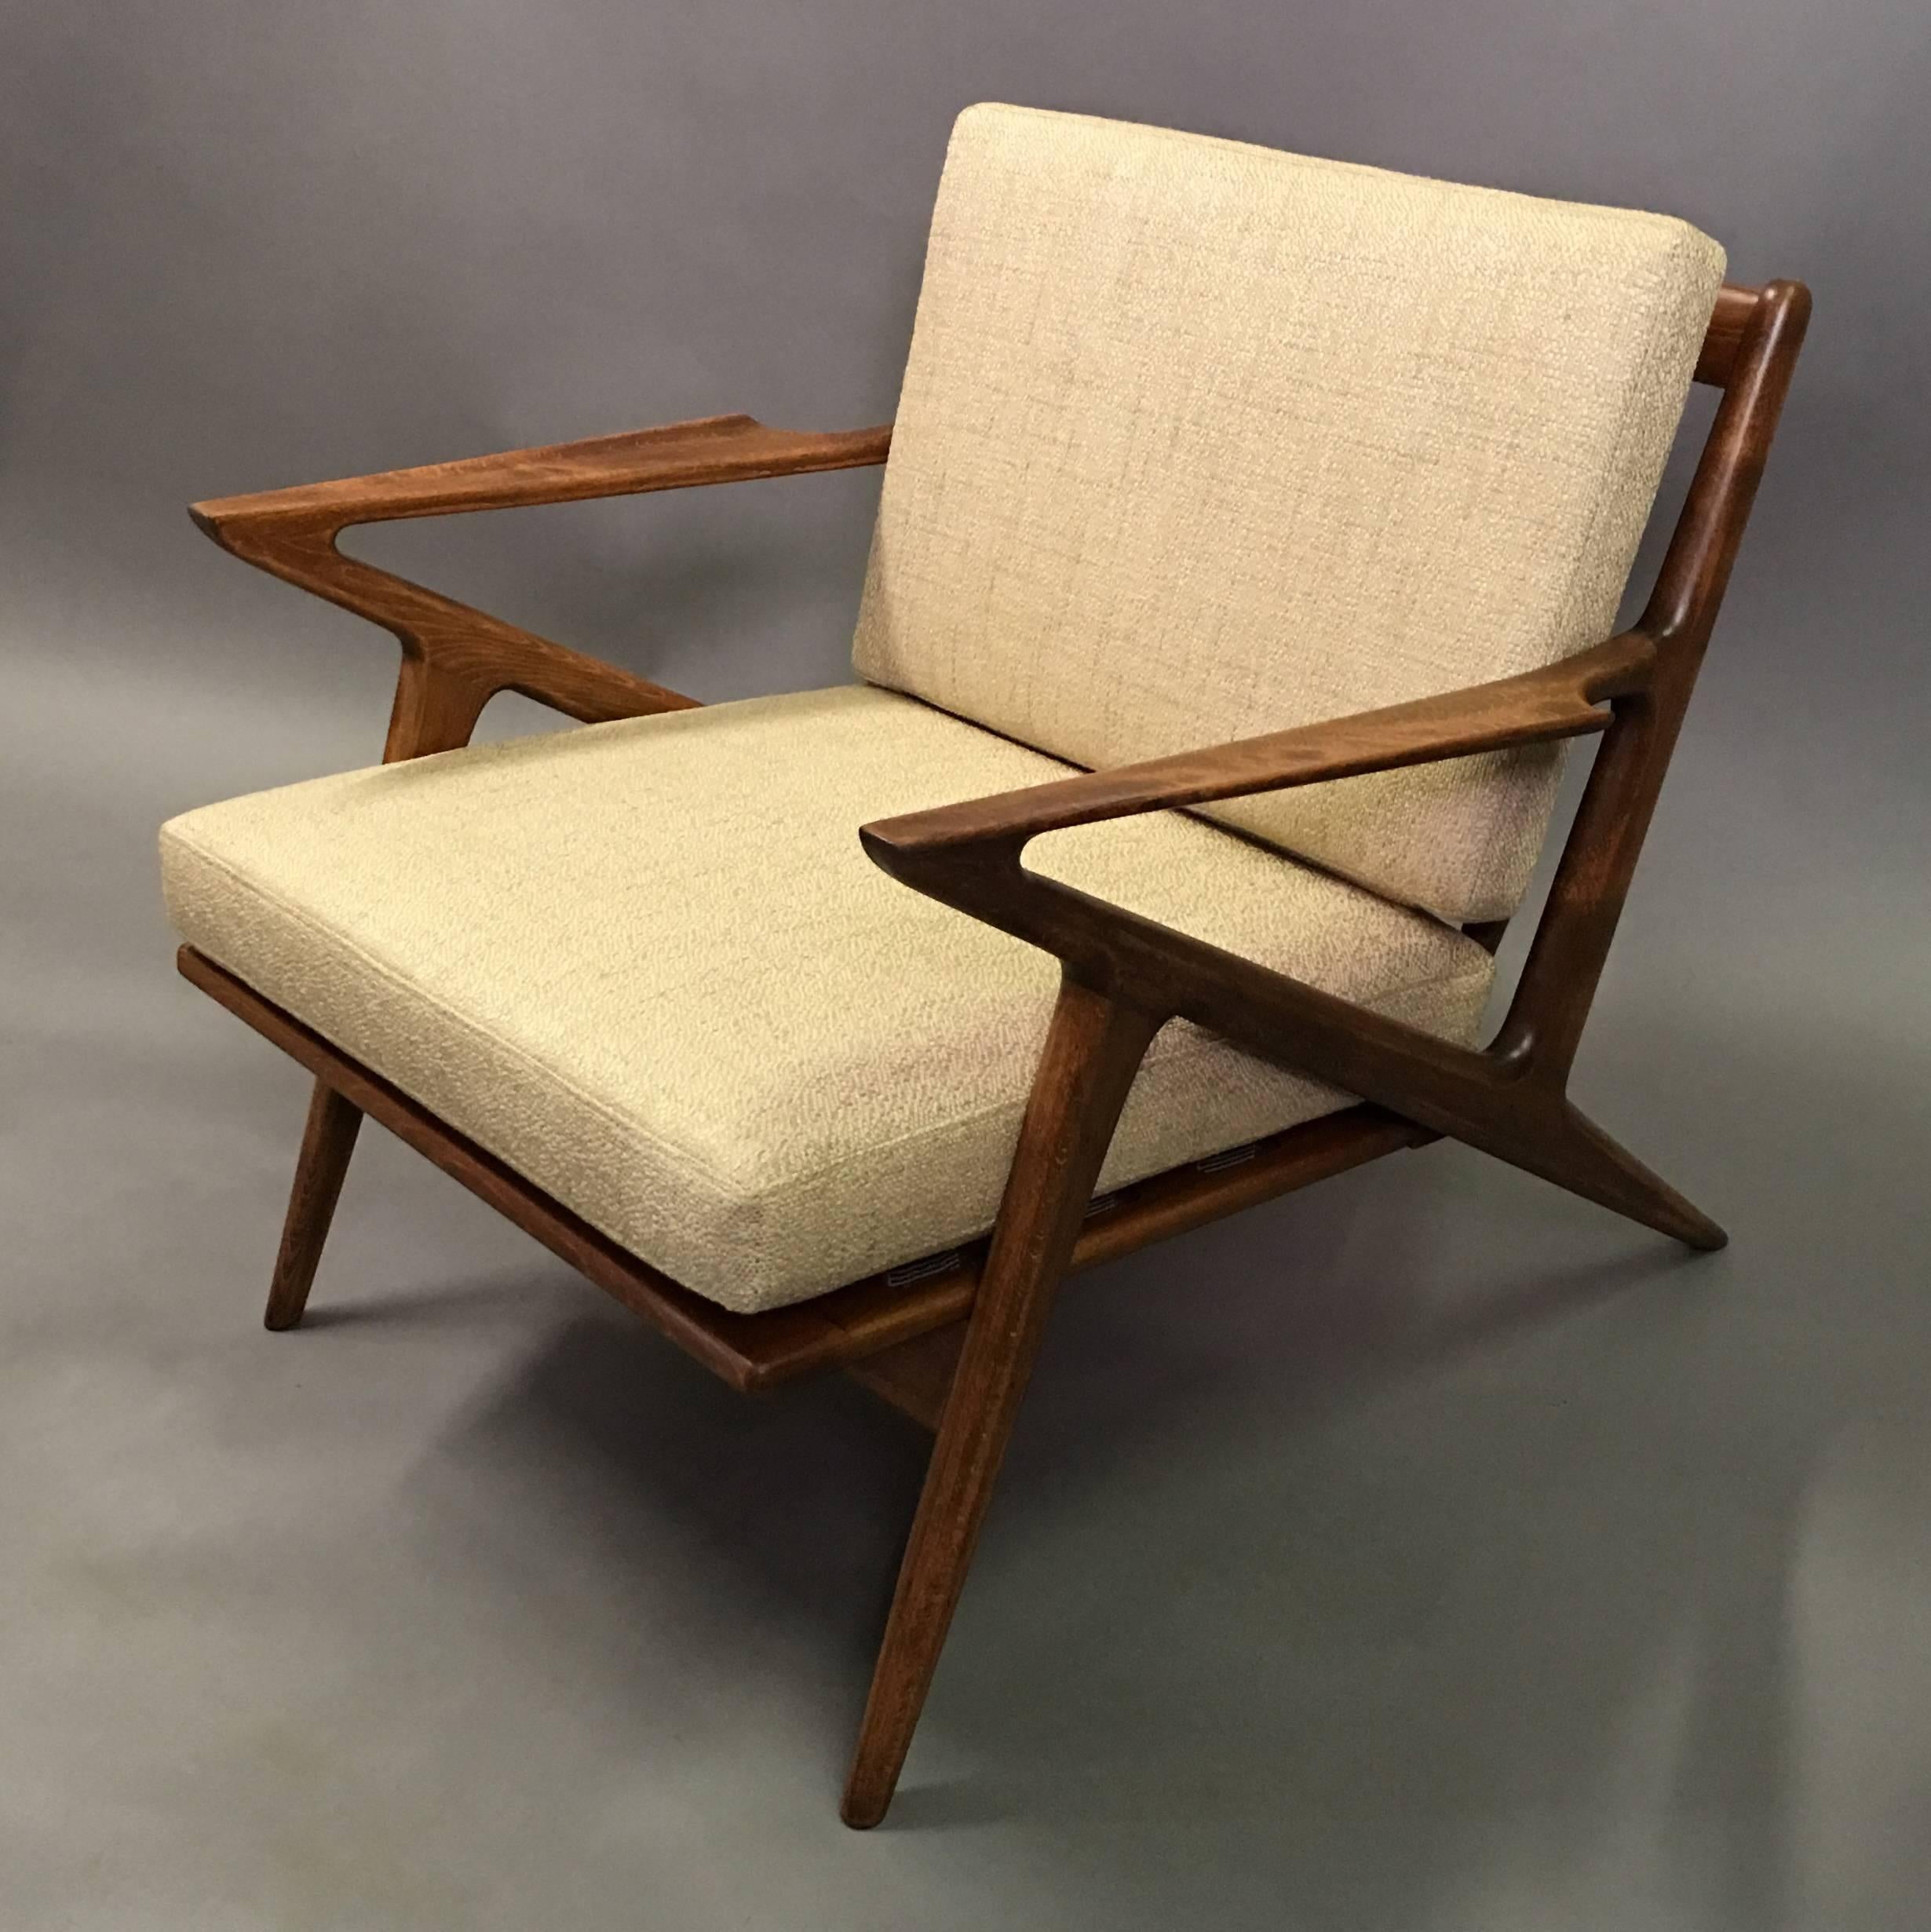 Classic, Danish Modern, slat-back, Z lounge chair designed by Poul Jensen for Selig has a newly refinished birch frame and oatmeal cotton blend upholstered seat and back. We have second teak Z chair as shown to make a pair that is listed separately.